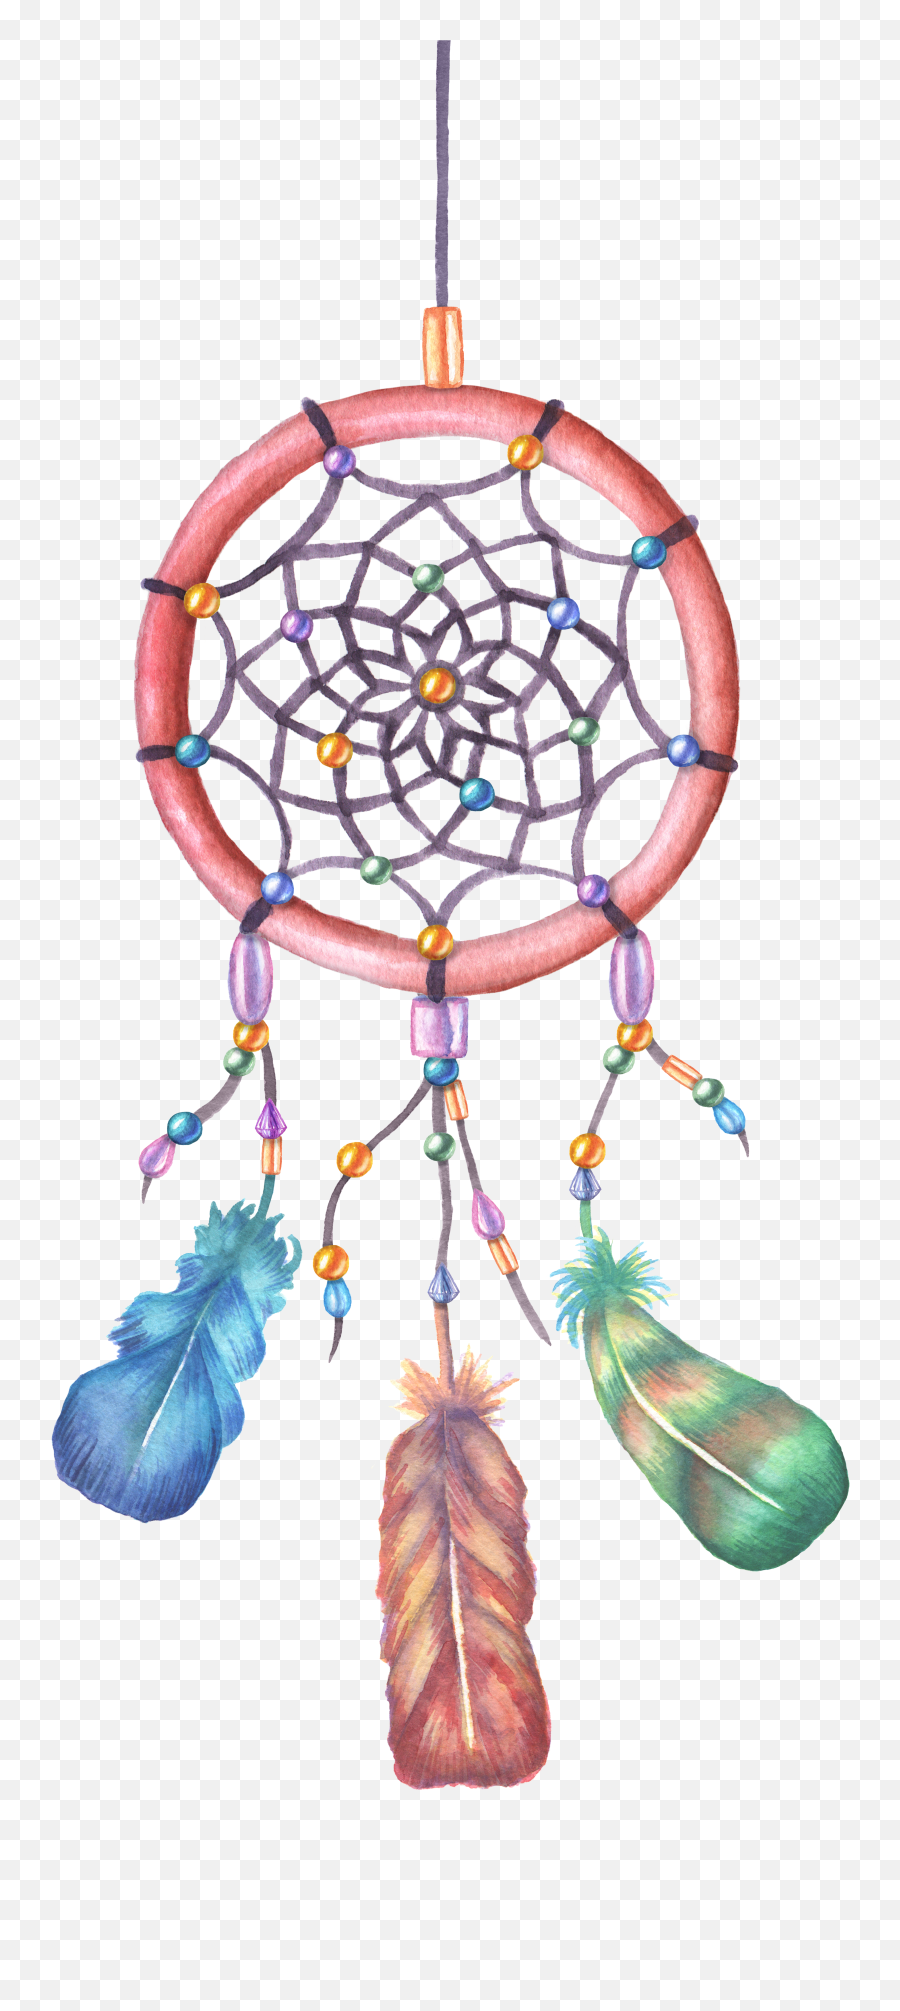 Download Dreamcatcher Illustration Watercolor Painting Red Png